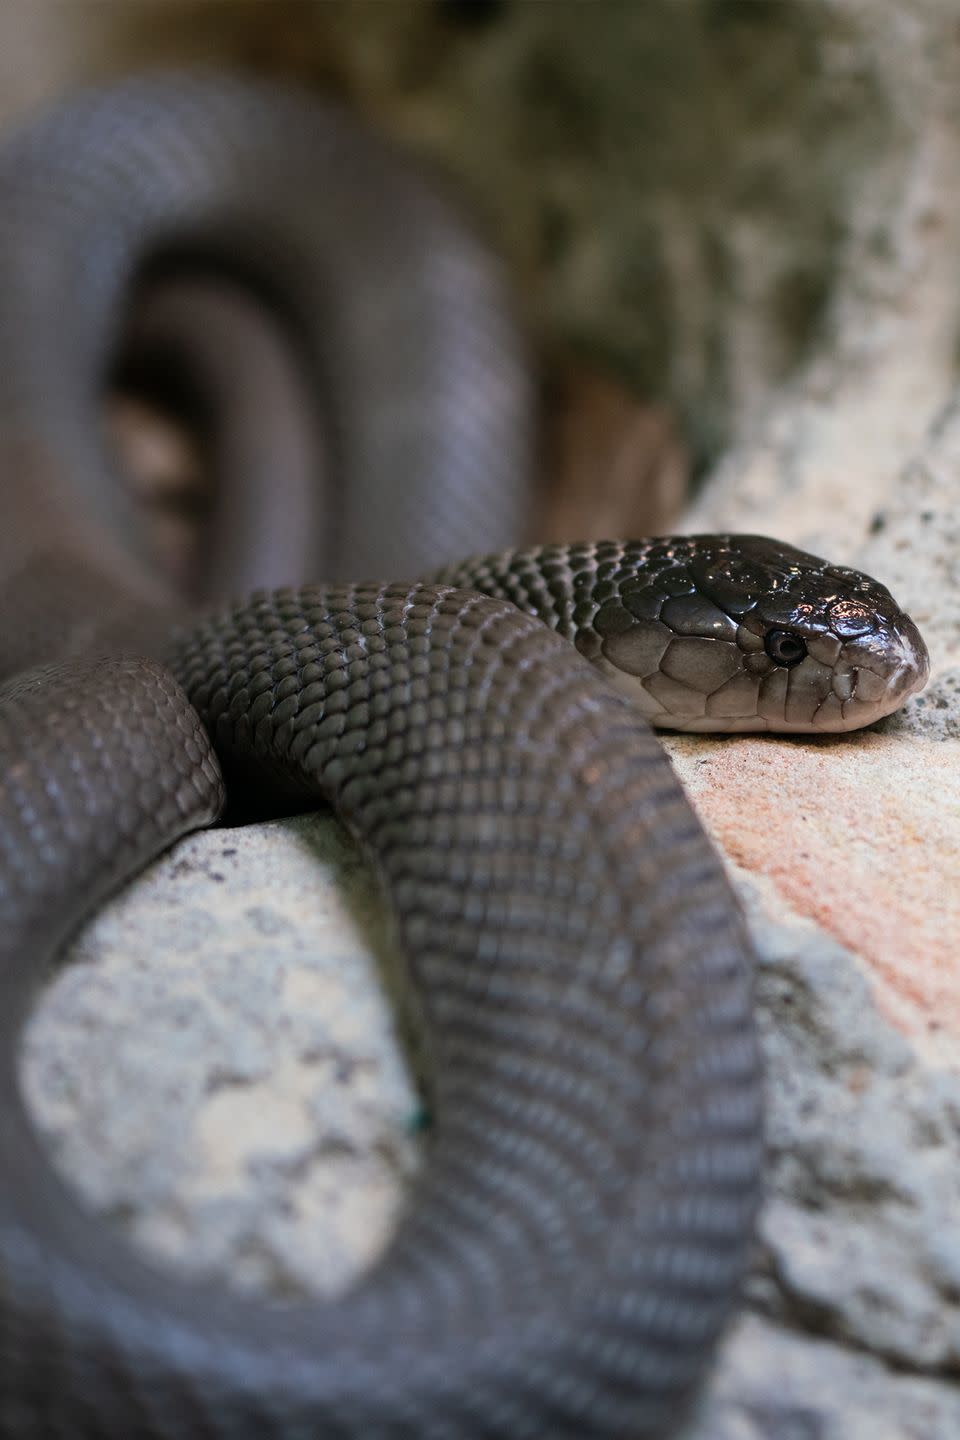 27. Inland taipan snakes have the most potent venom.